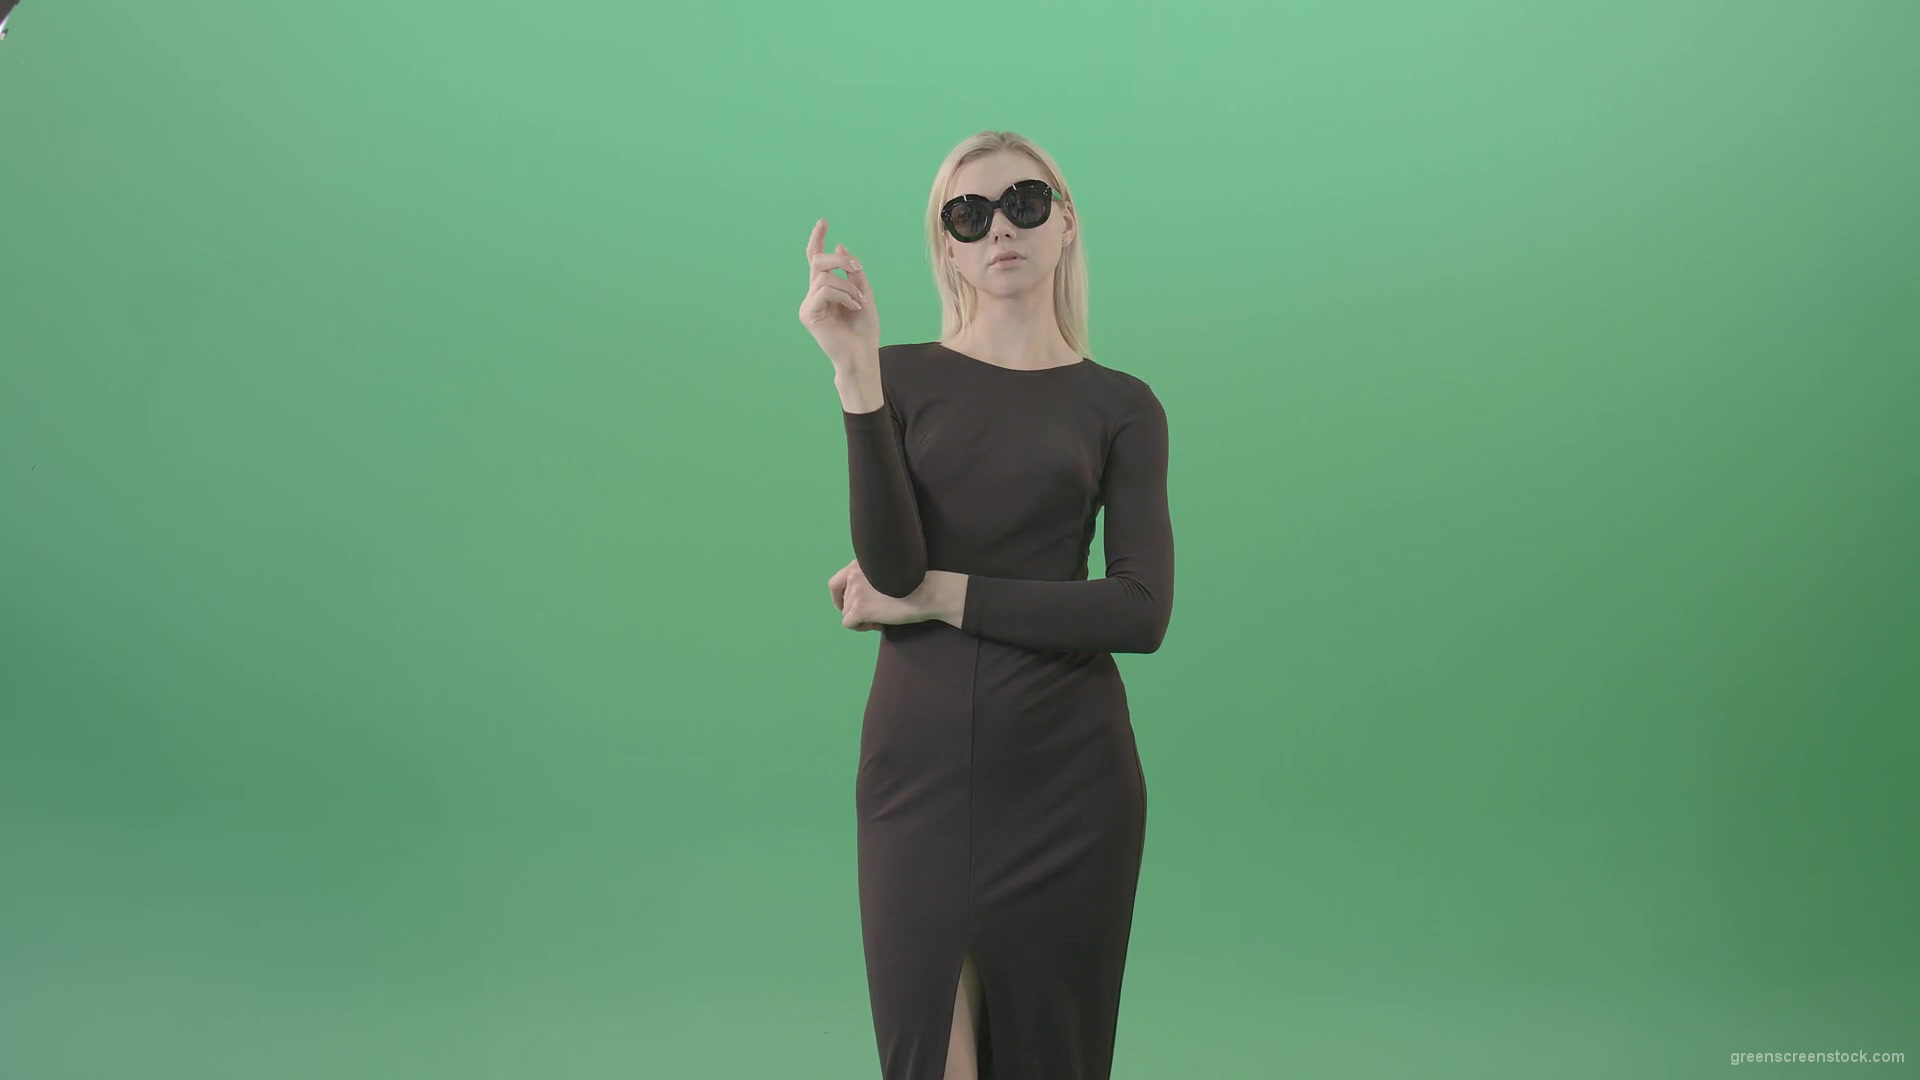 Elegant-woman-in-black-suite-searching-a-virtual-products-on-touch-screen-in-green-screen-studio-4K-Video-Footage-1920_005 Green Screen Stock